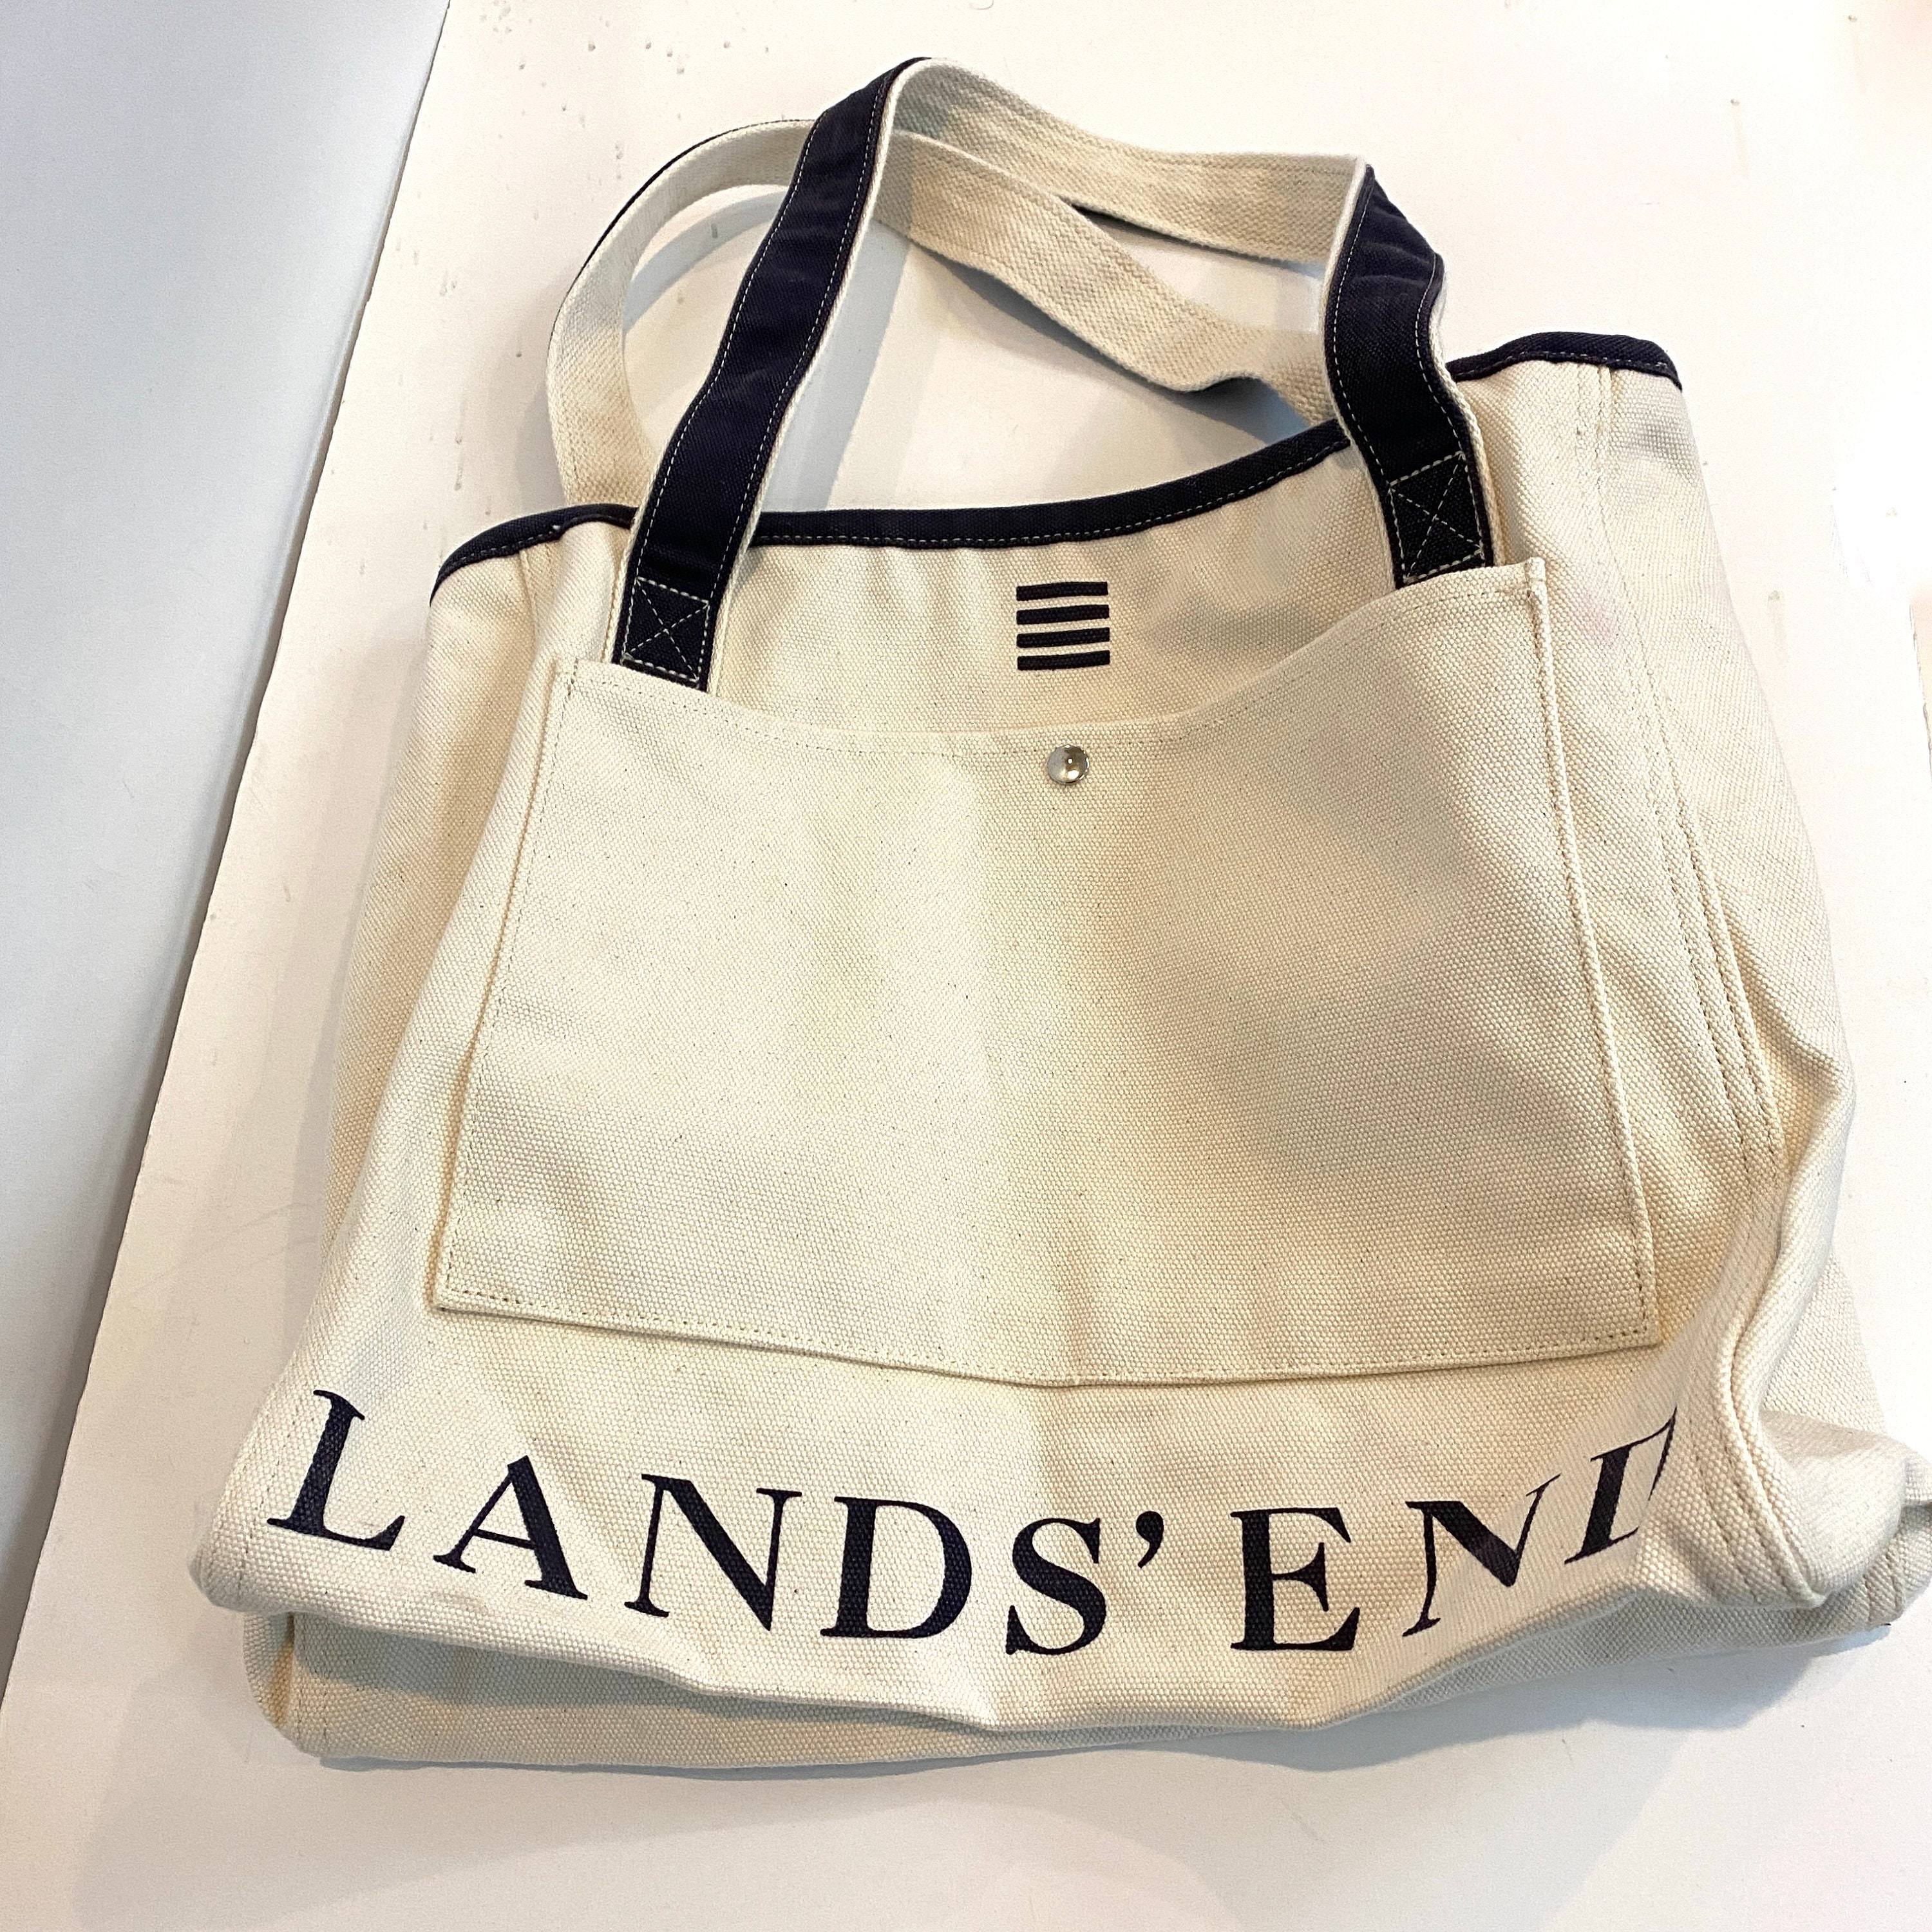 LANDS' END Canvas Tote Bag With Embroidered Name "